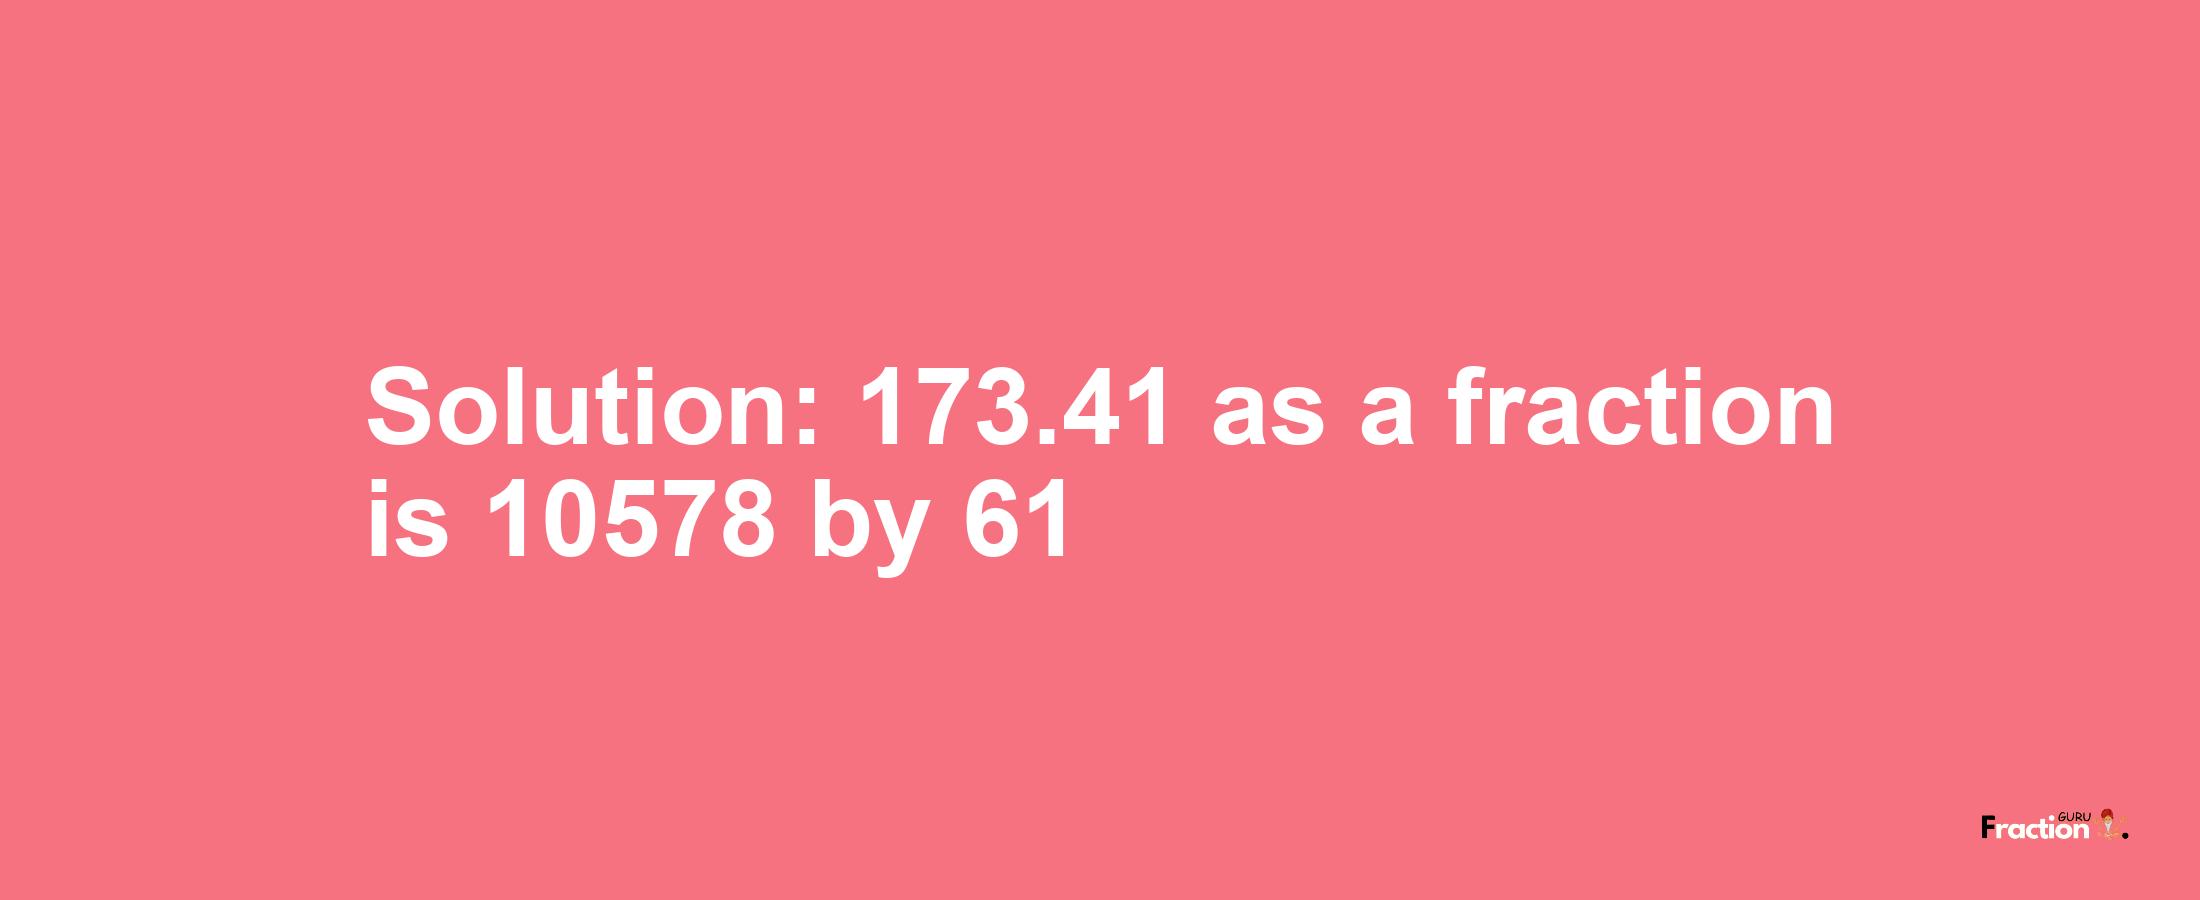 Solution:173.41 as a fraction is 10578/61